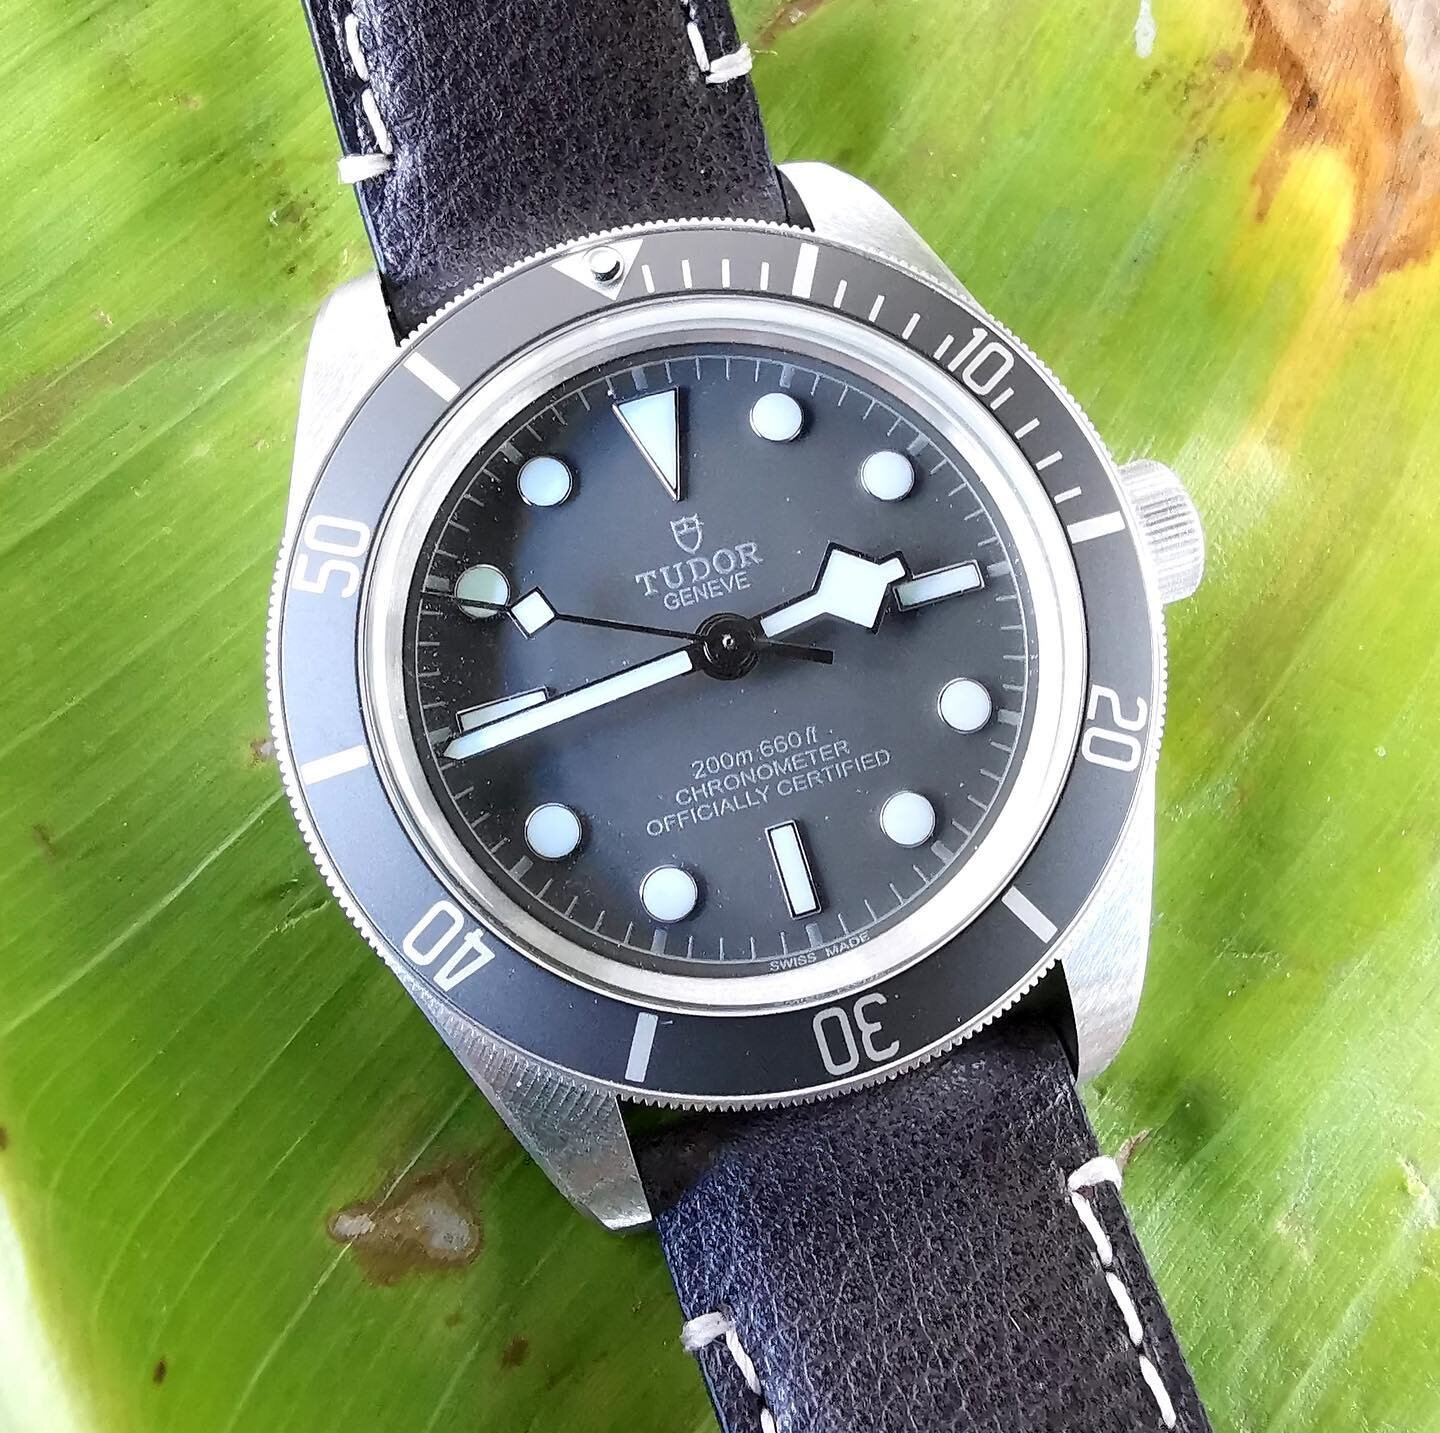 The Black Bay series from Tudor has been their best seller for a while, and remains to be the focus of the brand for 2021. This new watch has some additional interest in the use of a case made in a special solid silver alloy.

The Black Bay Fifty-Eig